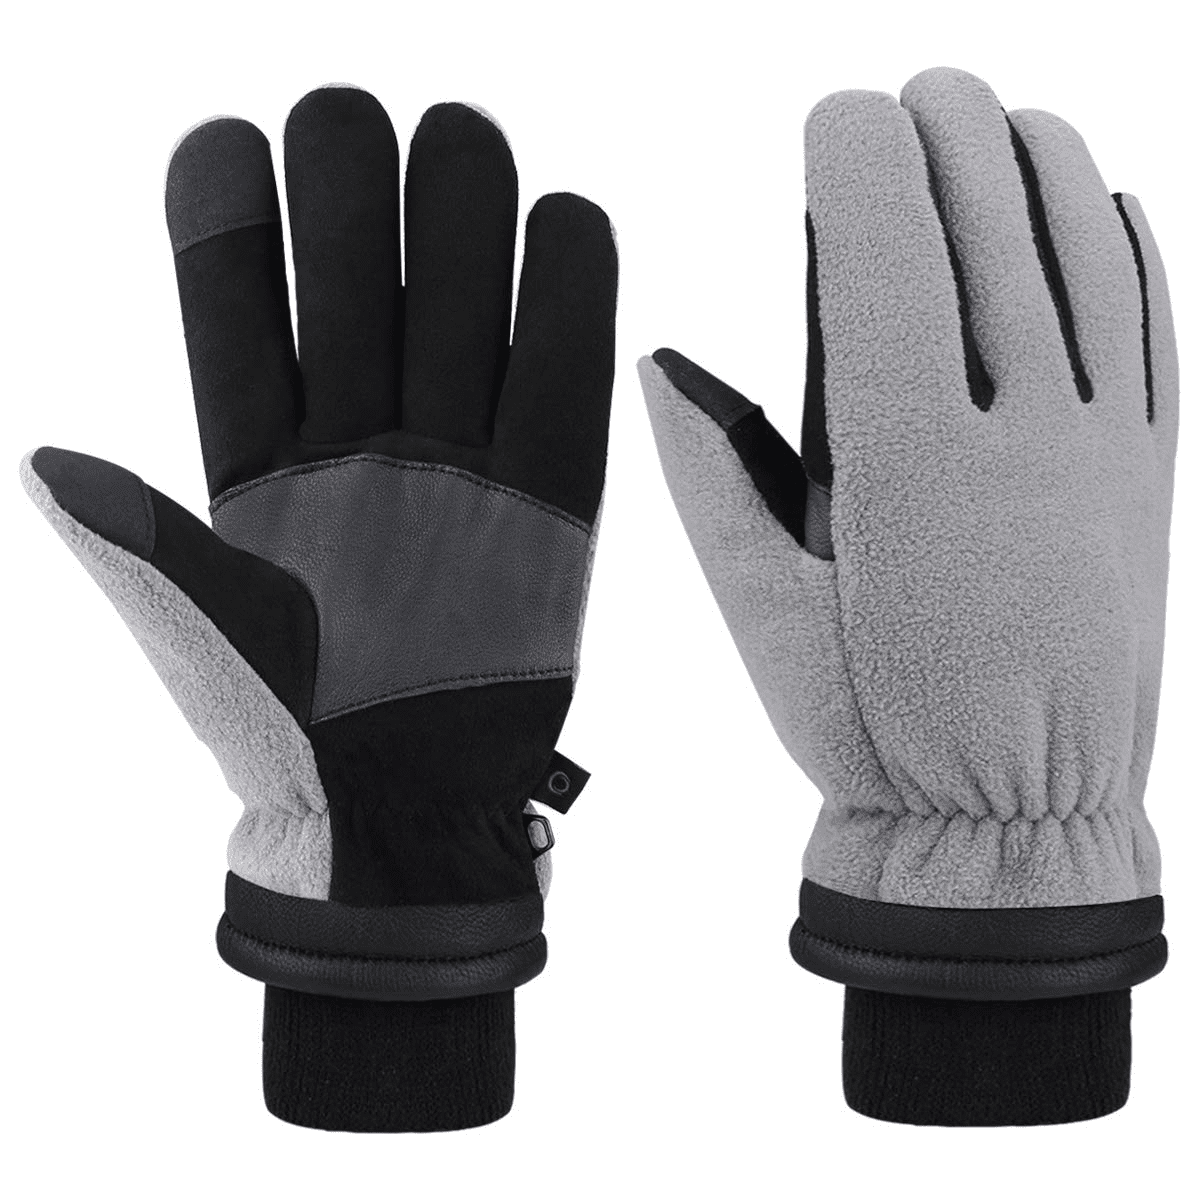 CCBETTER Winter Gloves Ski WindproofGloves for Cowhide Palm & 3M Thinsulate 